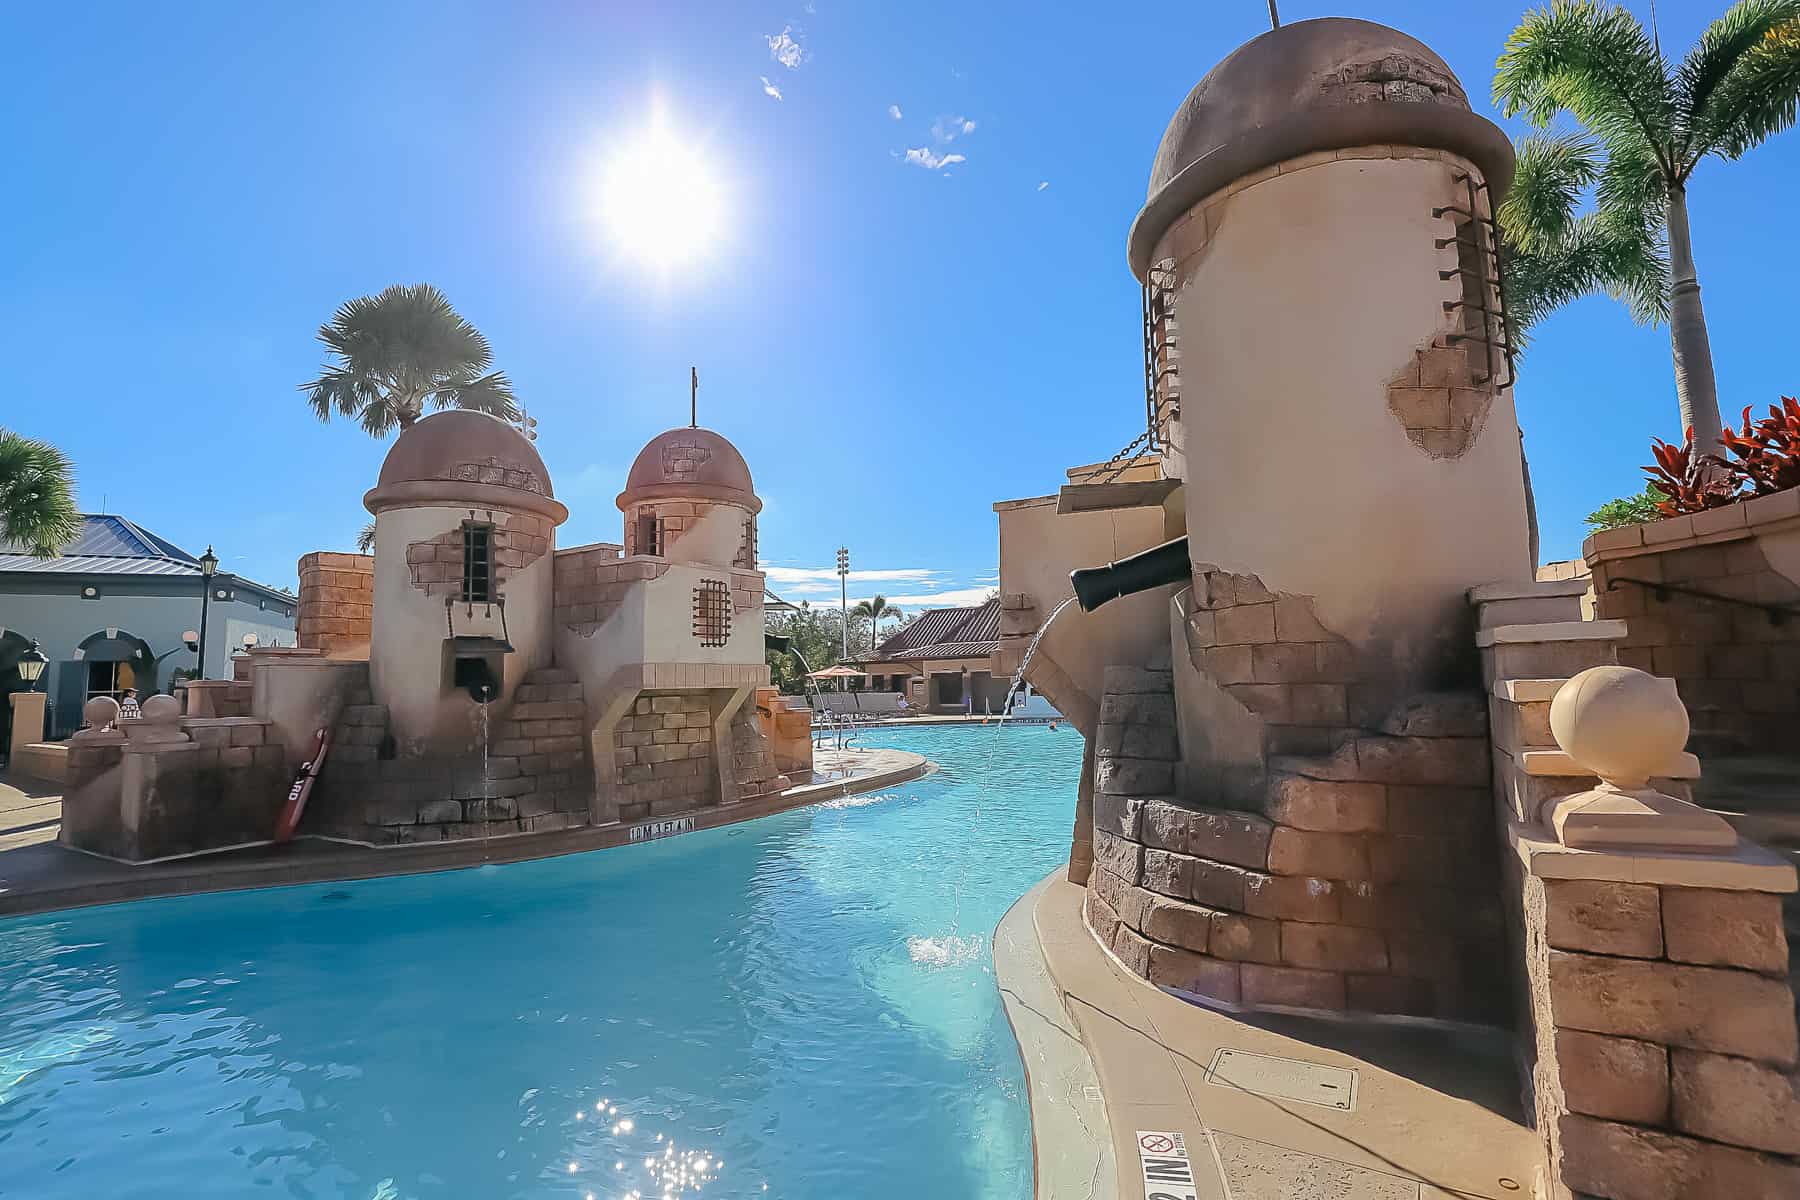 The Fuentes del Morro pool at Disney's Caribbean Beach showing Spanish fortress theming. 